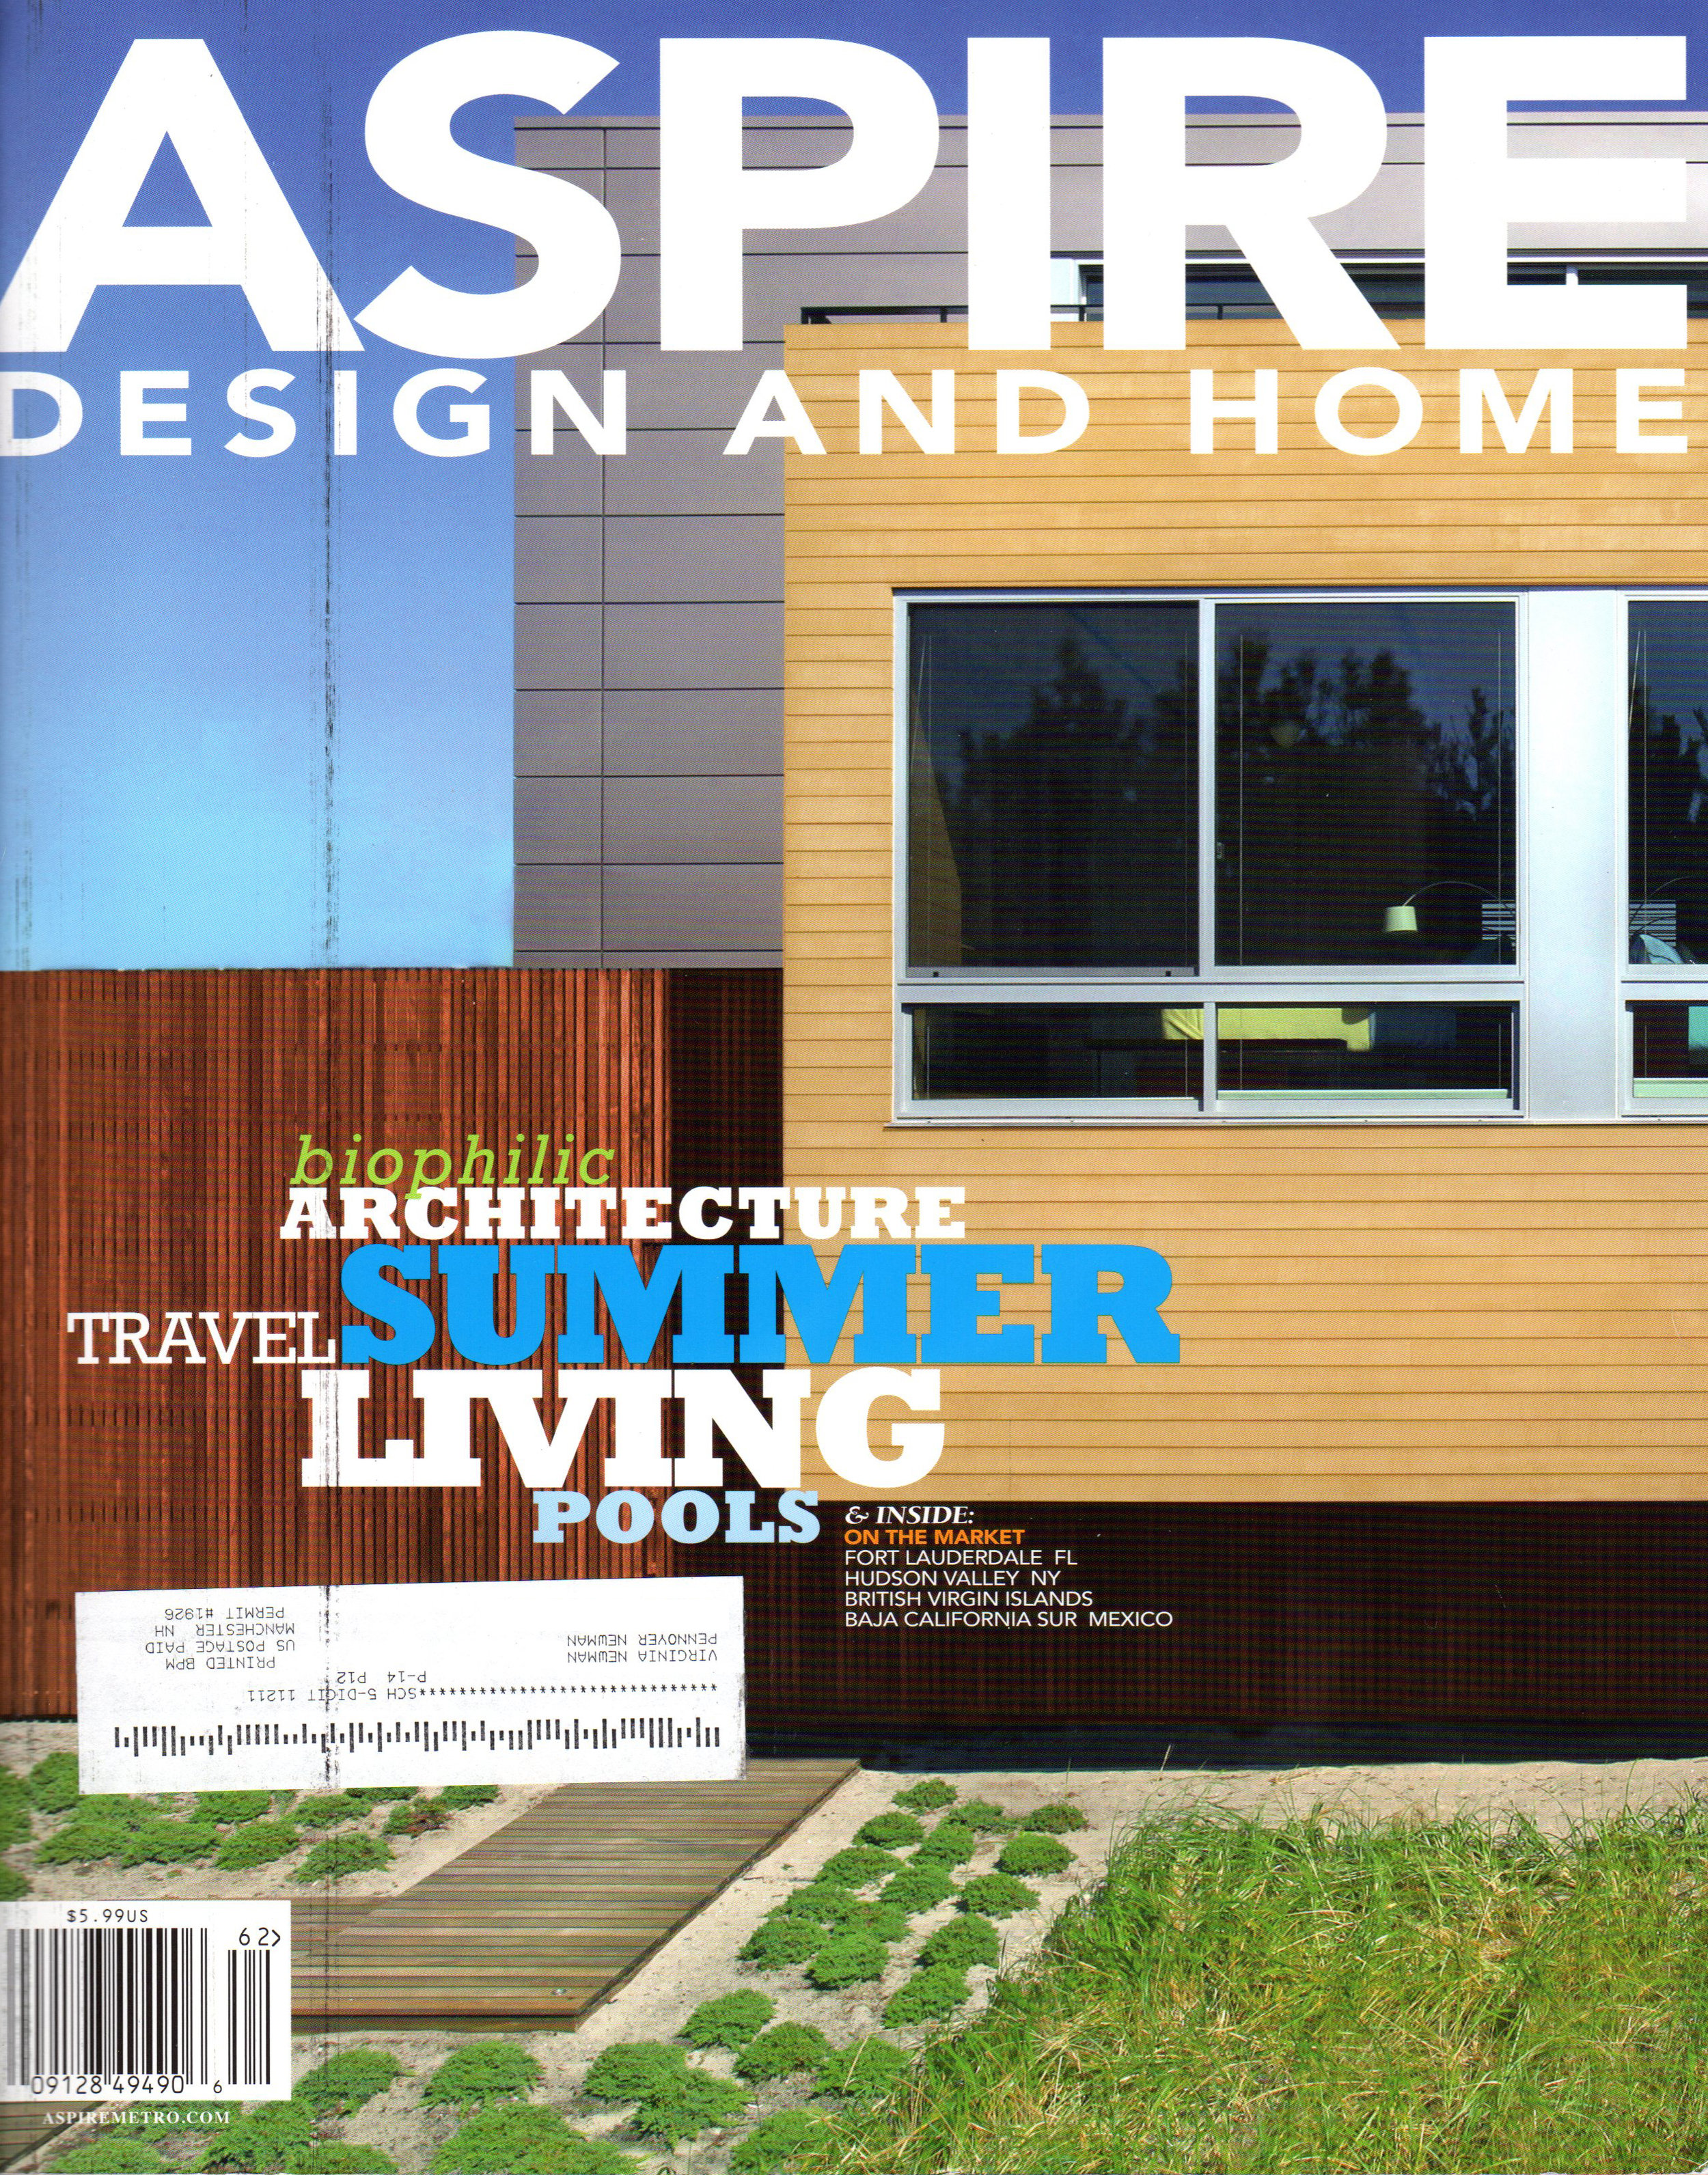 Pennoyer Newman in Aspire Design and Home Magazine